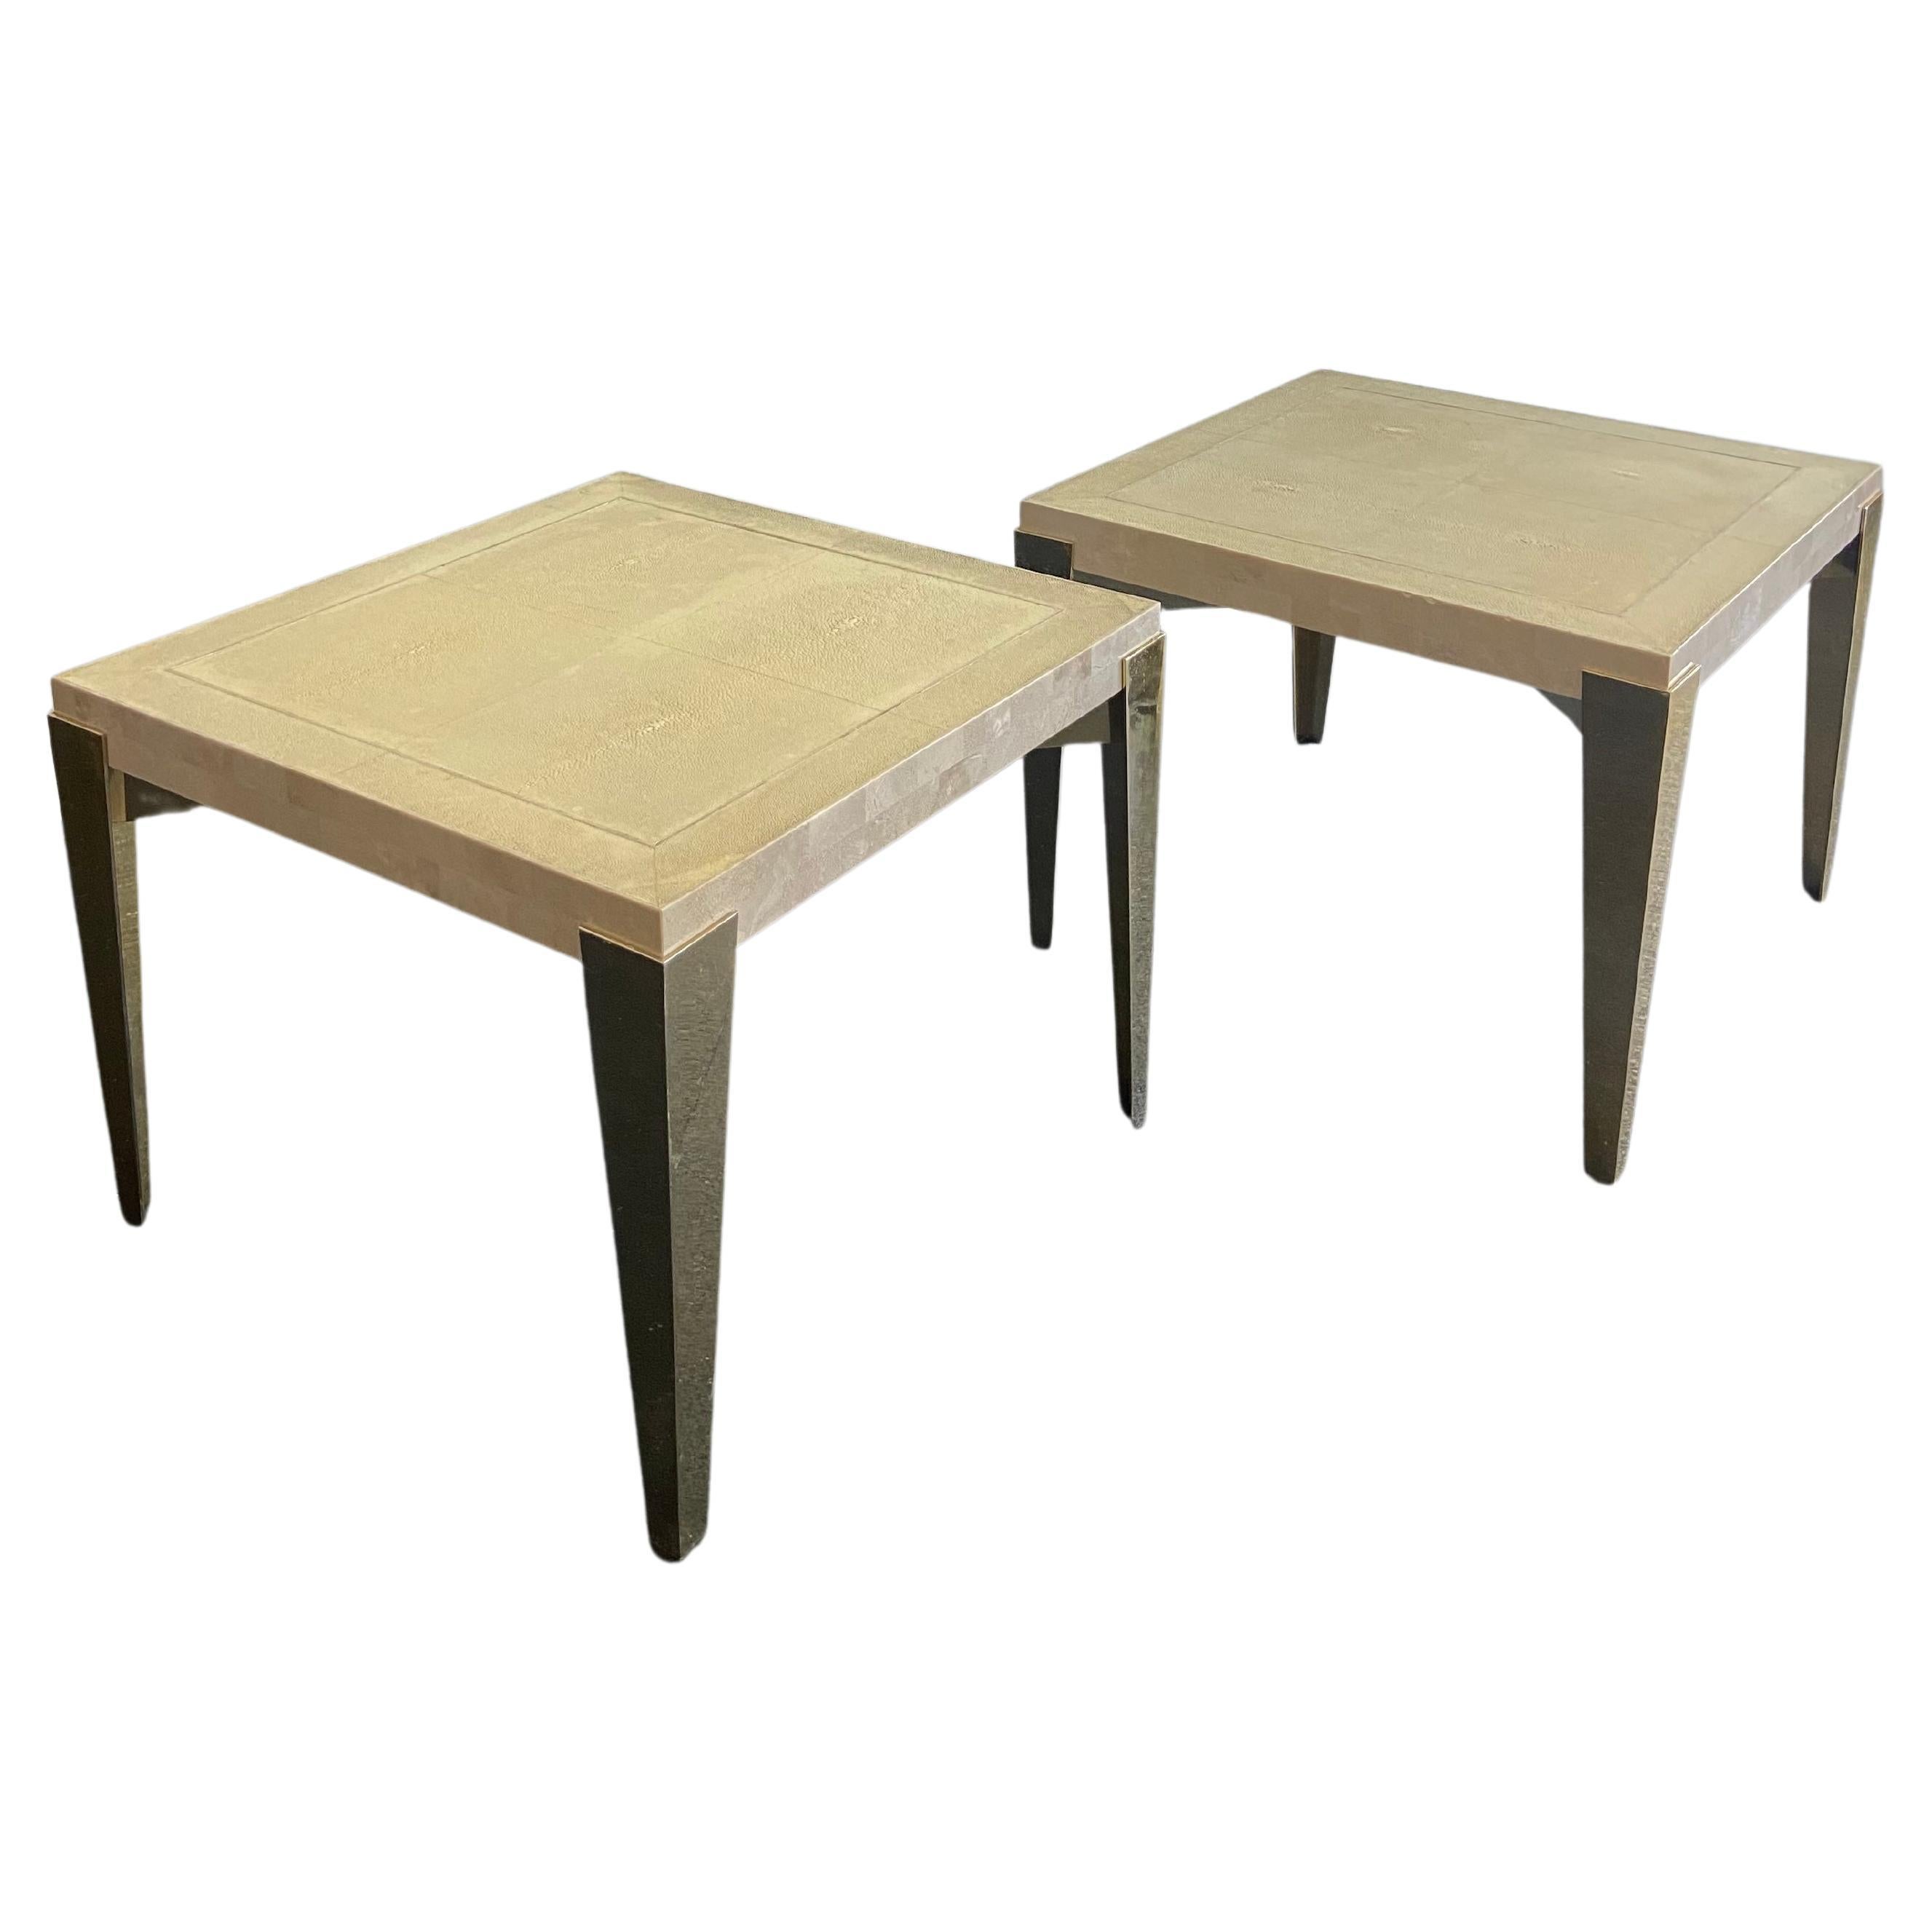 Karl Springer Shagreen, Stone and Anodized Aluminum Side Tables - a Pair For Sale